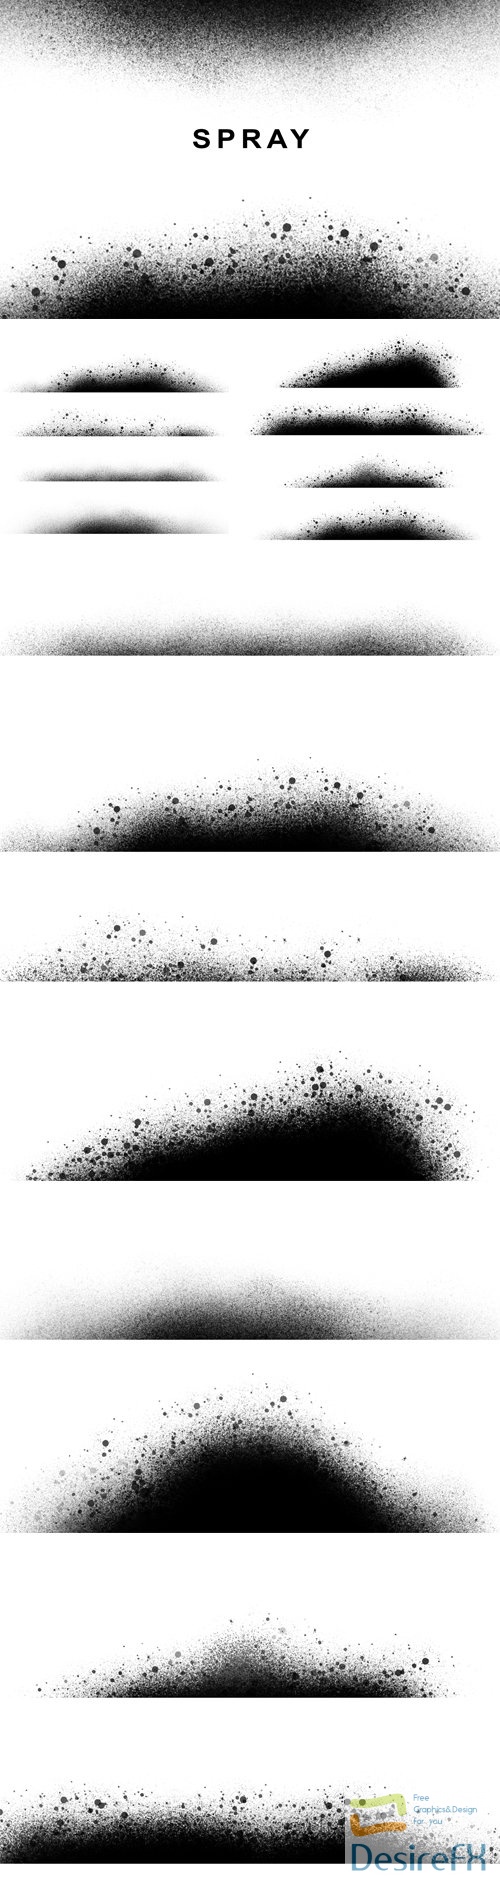 Dust Spray Brushes for Photoshop